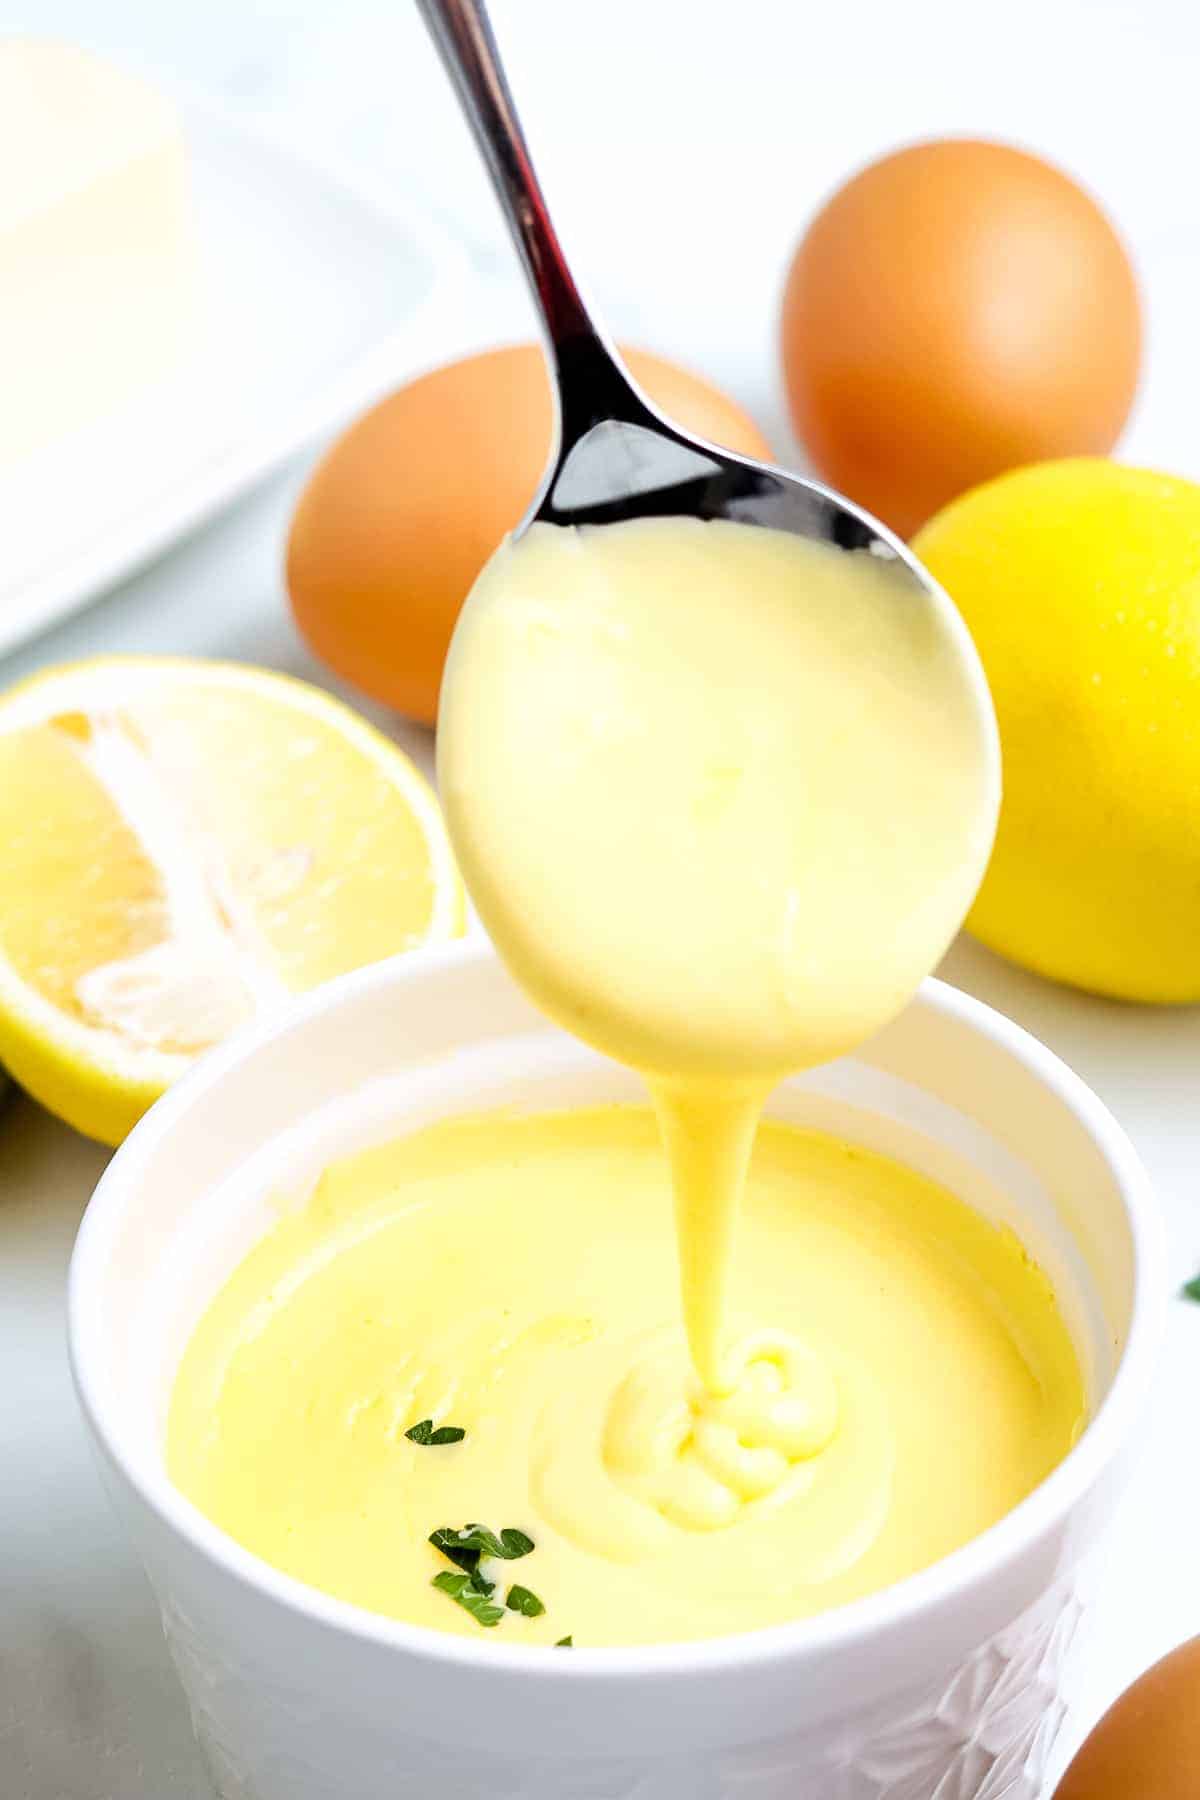 Spoon with Hollandaise Sauce on it over a bowl of sauce